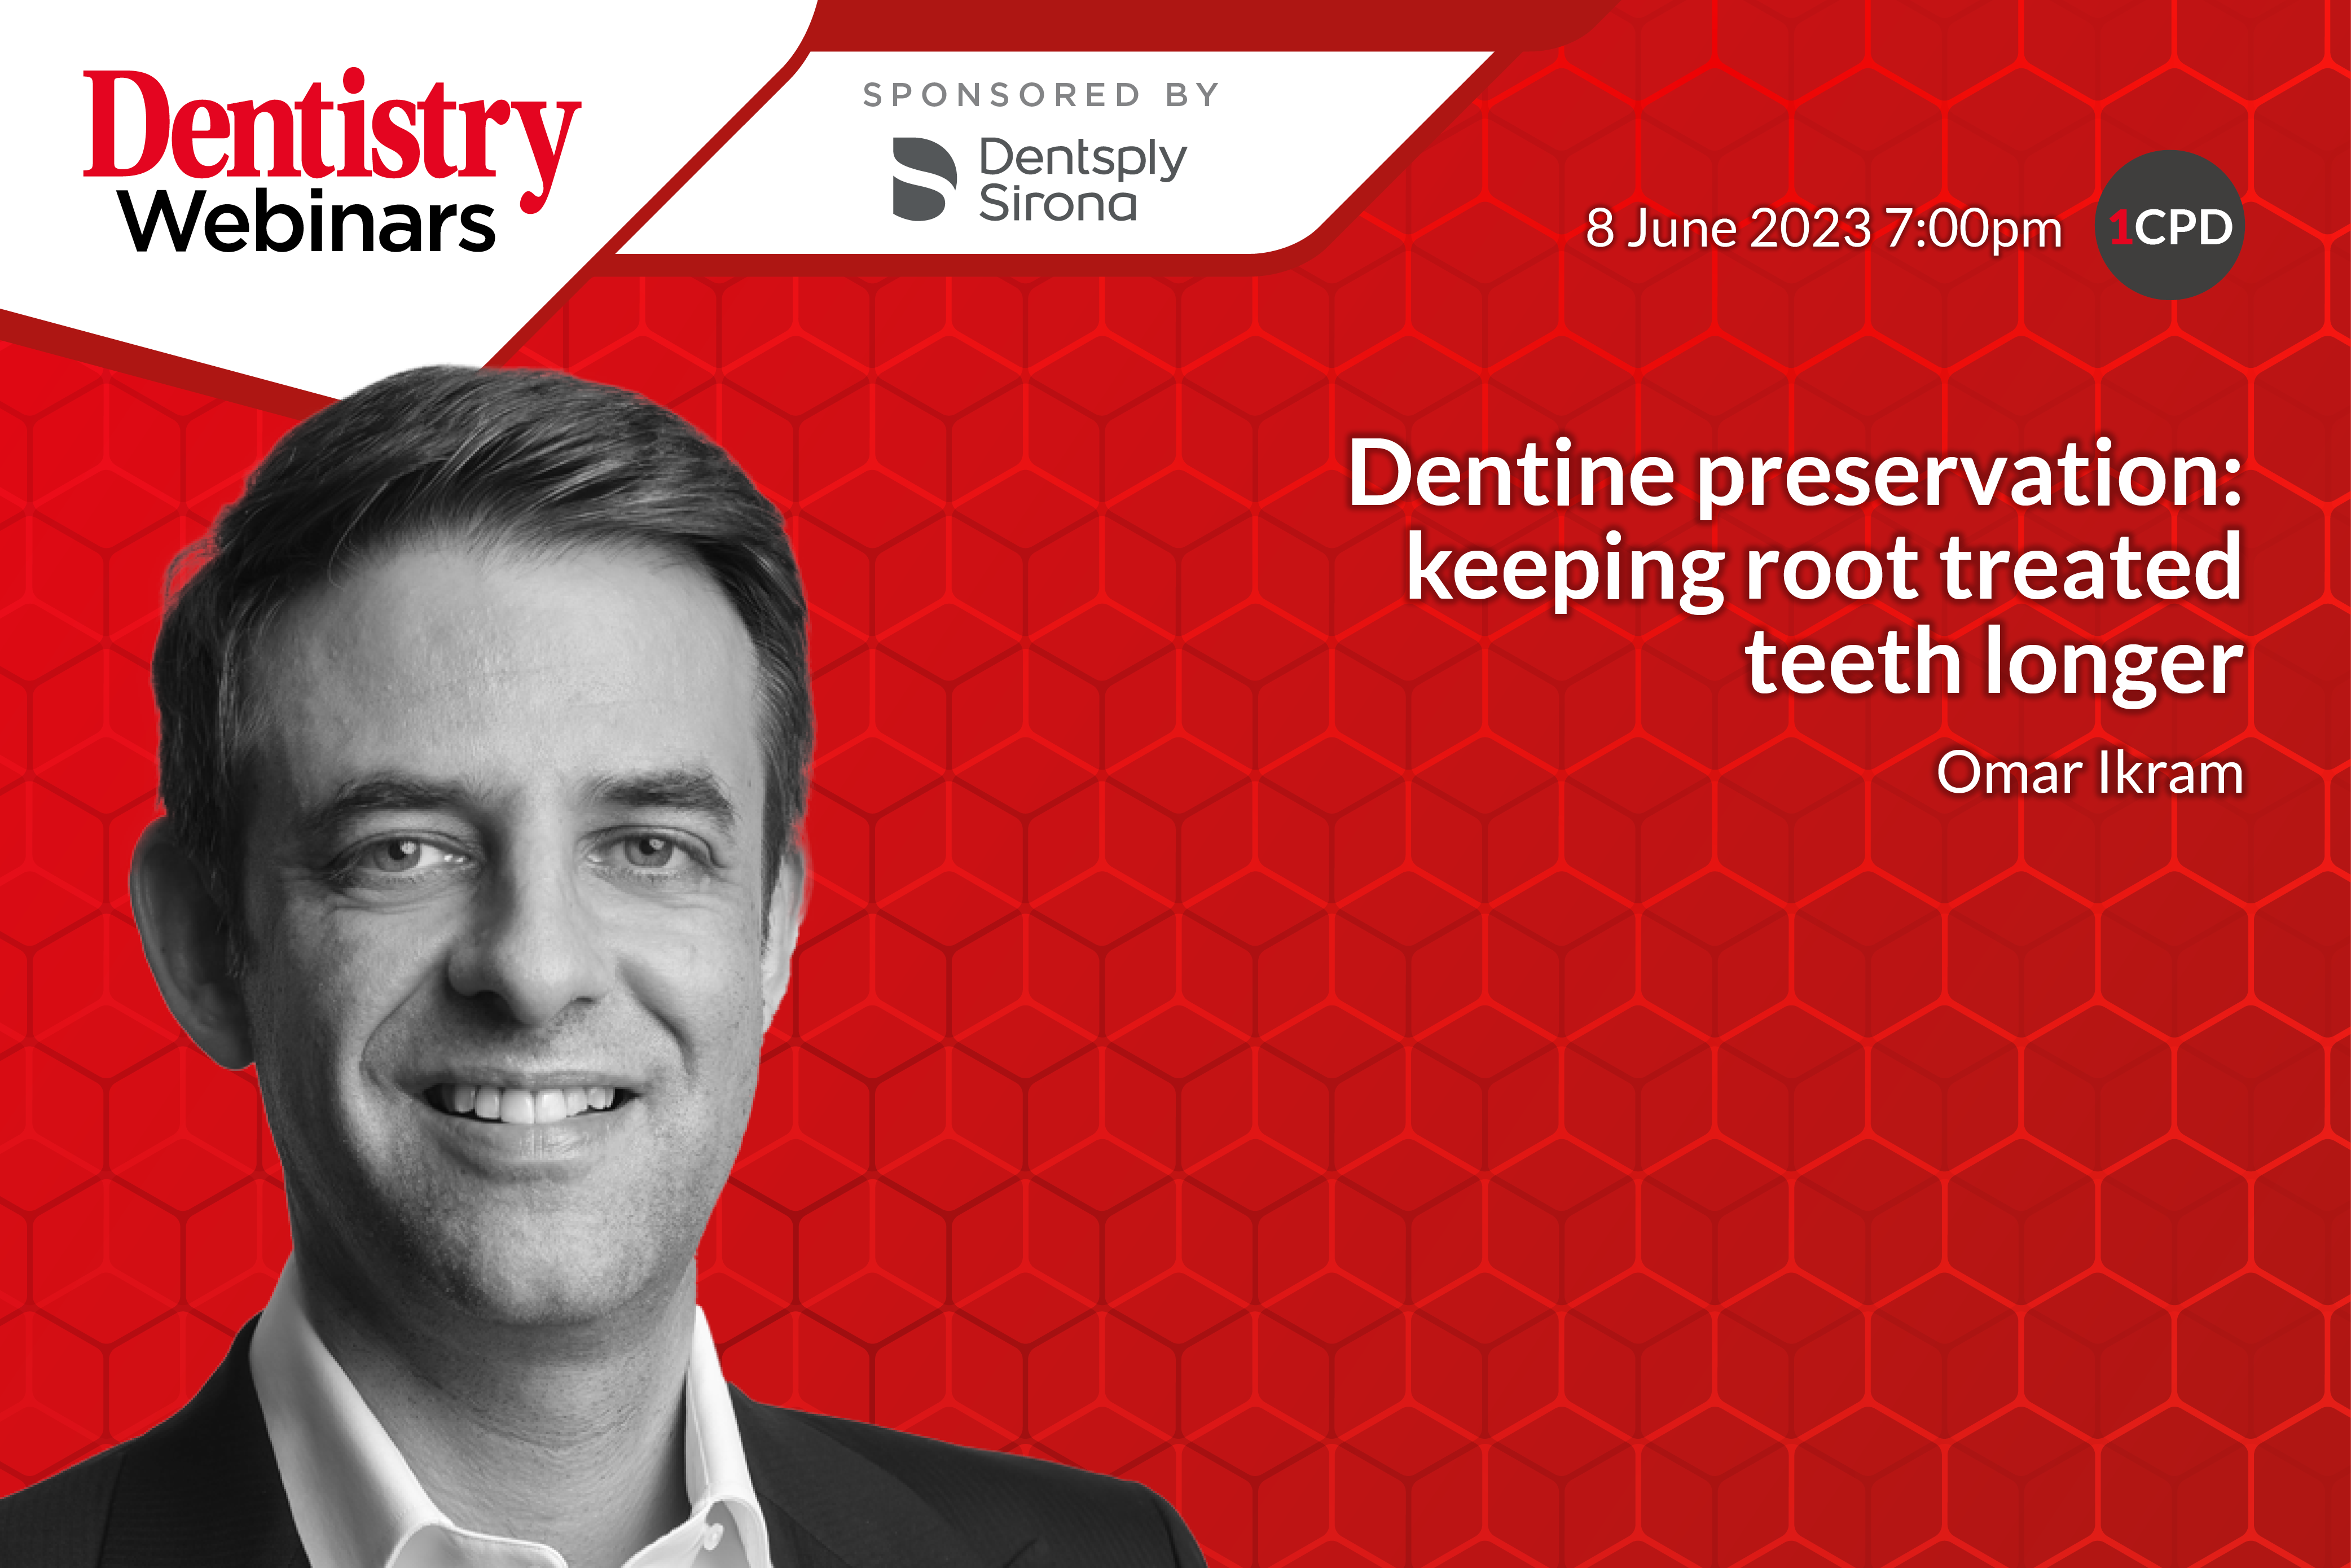 Join Omar Ikram on Thursday 8 June at 7pm as he discusses dentine preservation: keeping root treated longer.